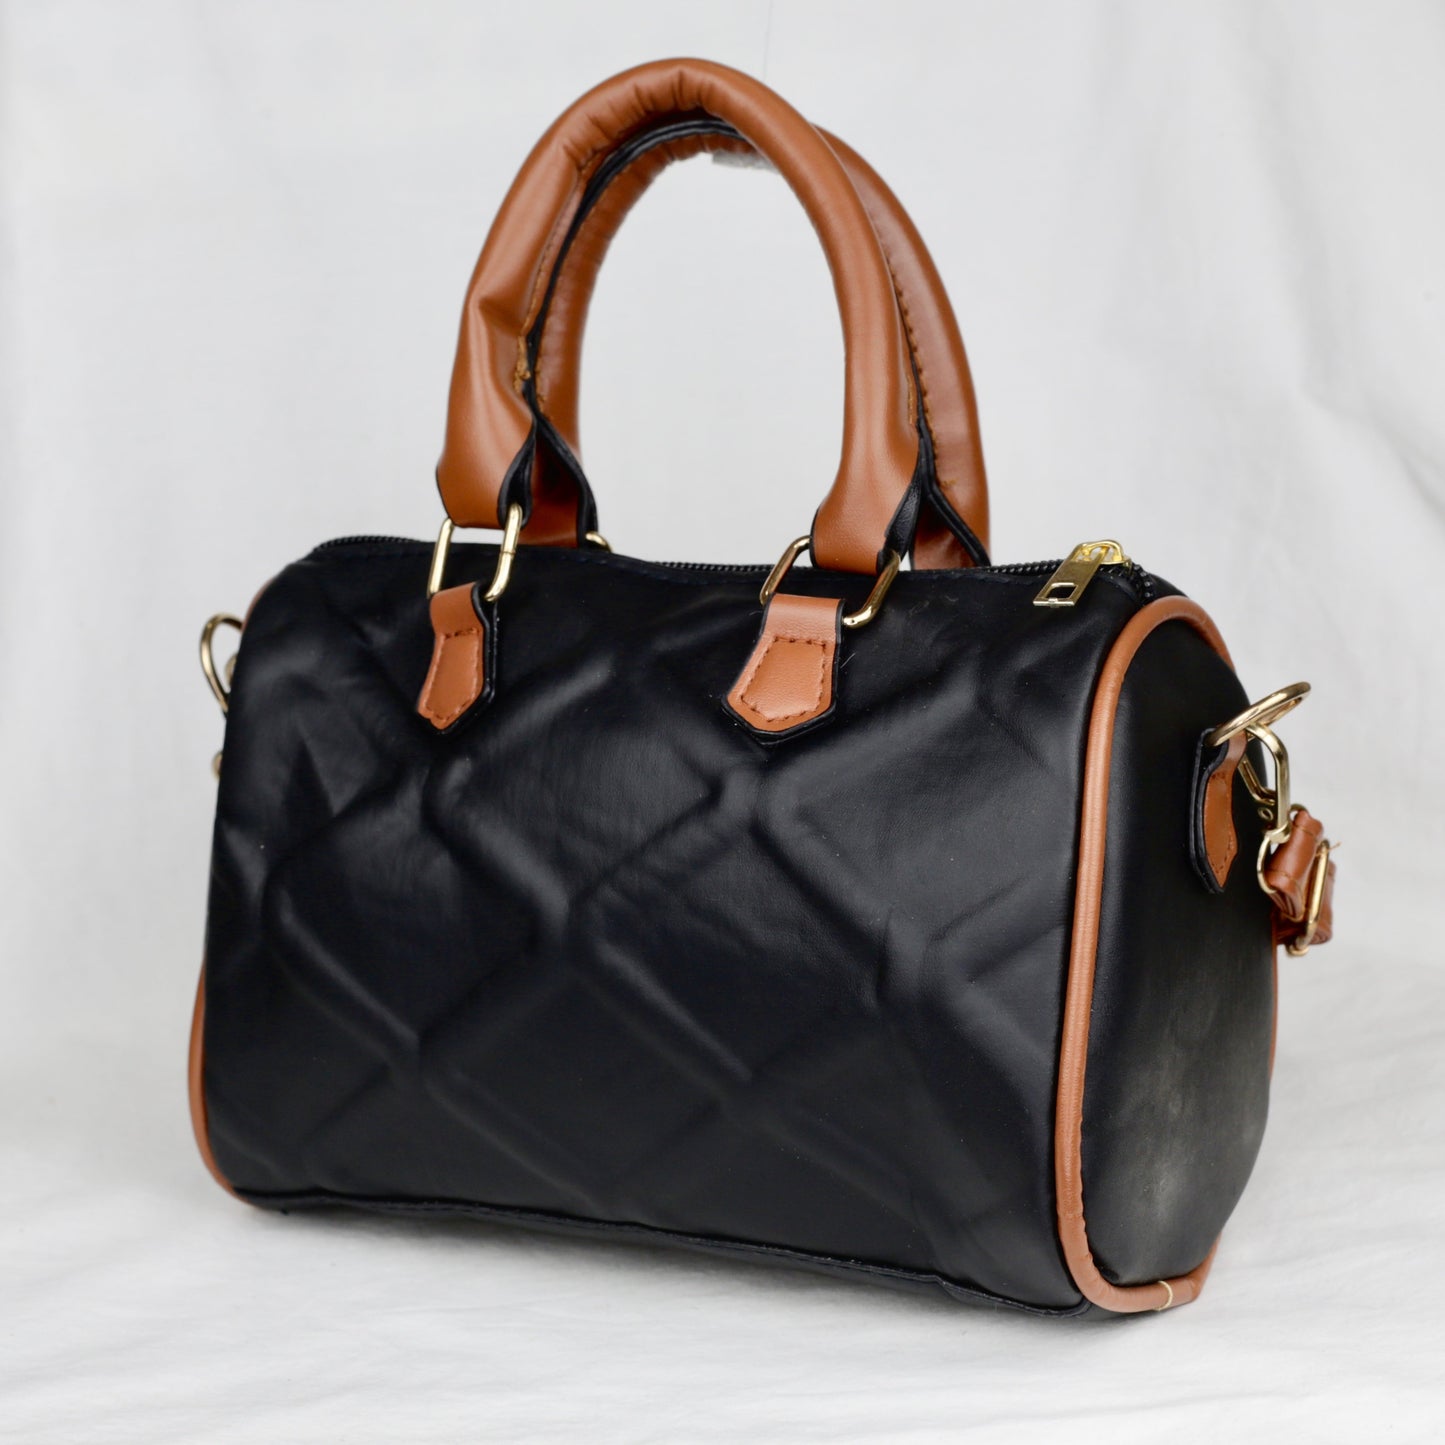 Delilah Duffle Bag - The Accessorys Official